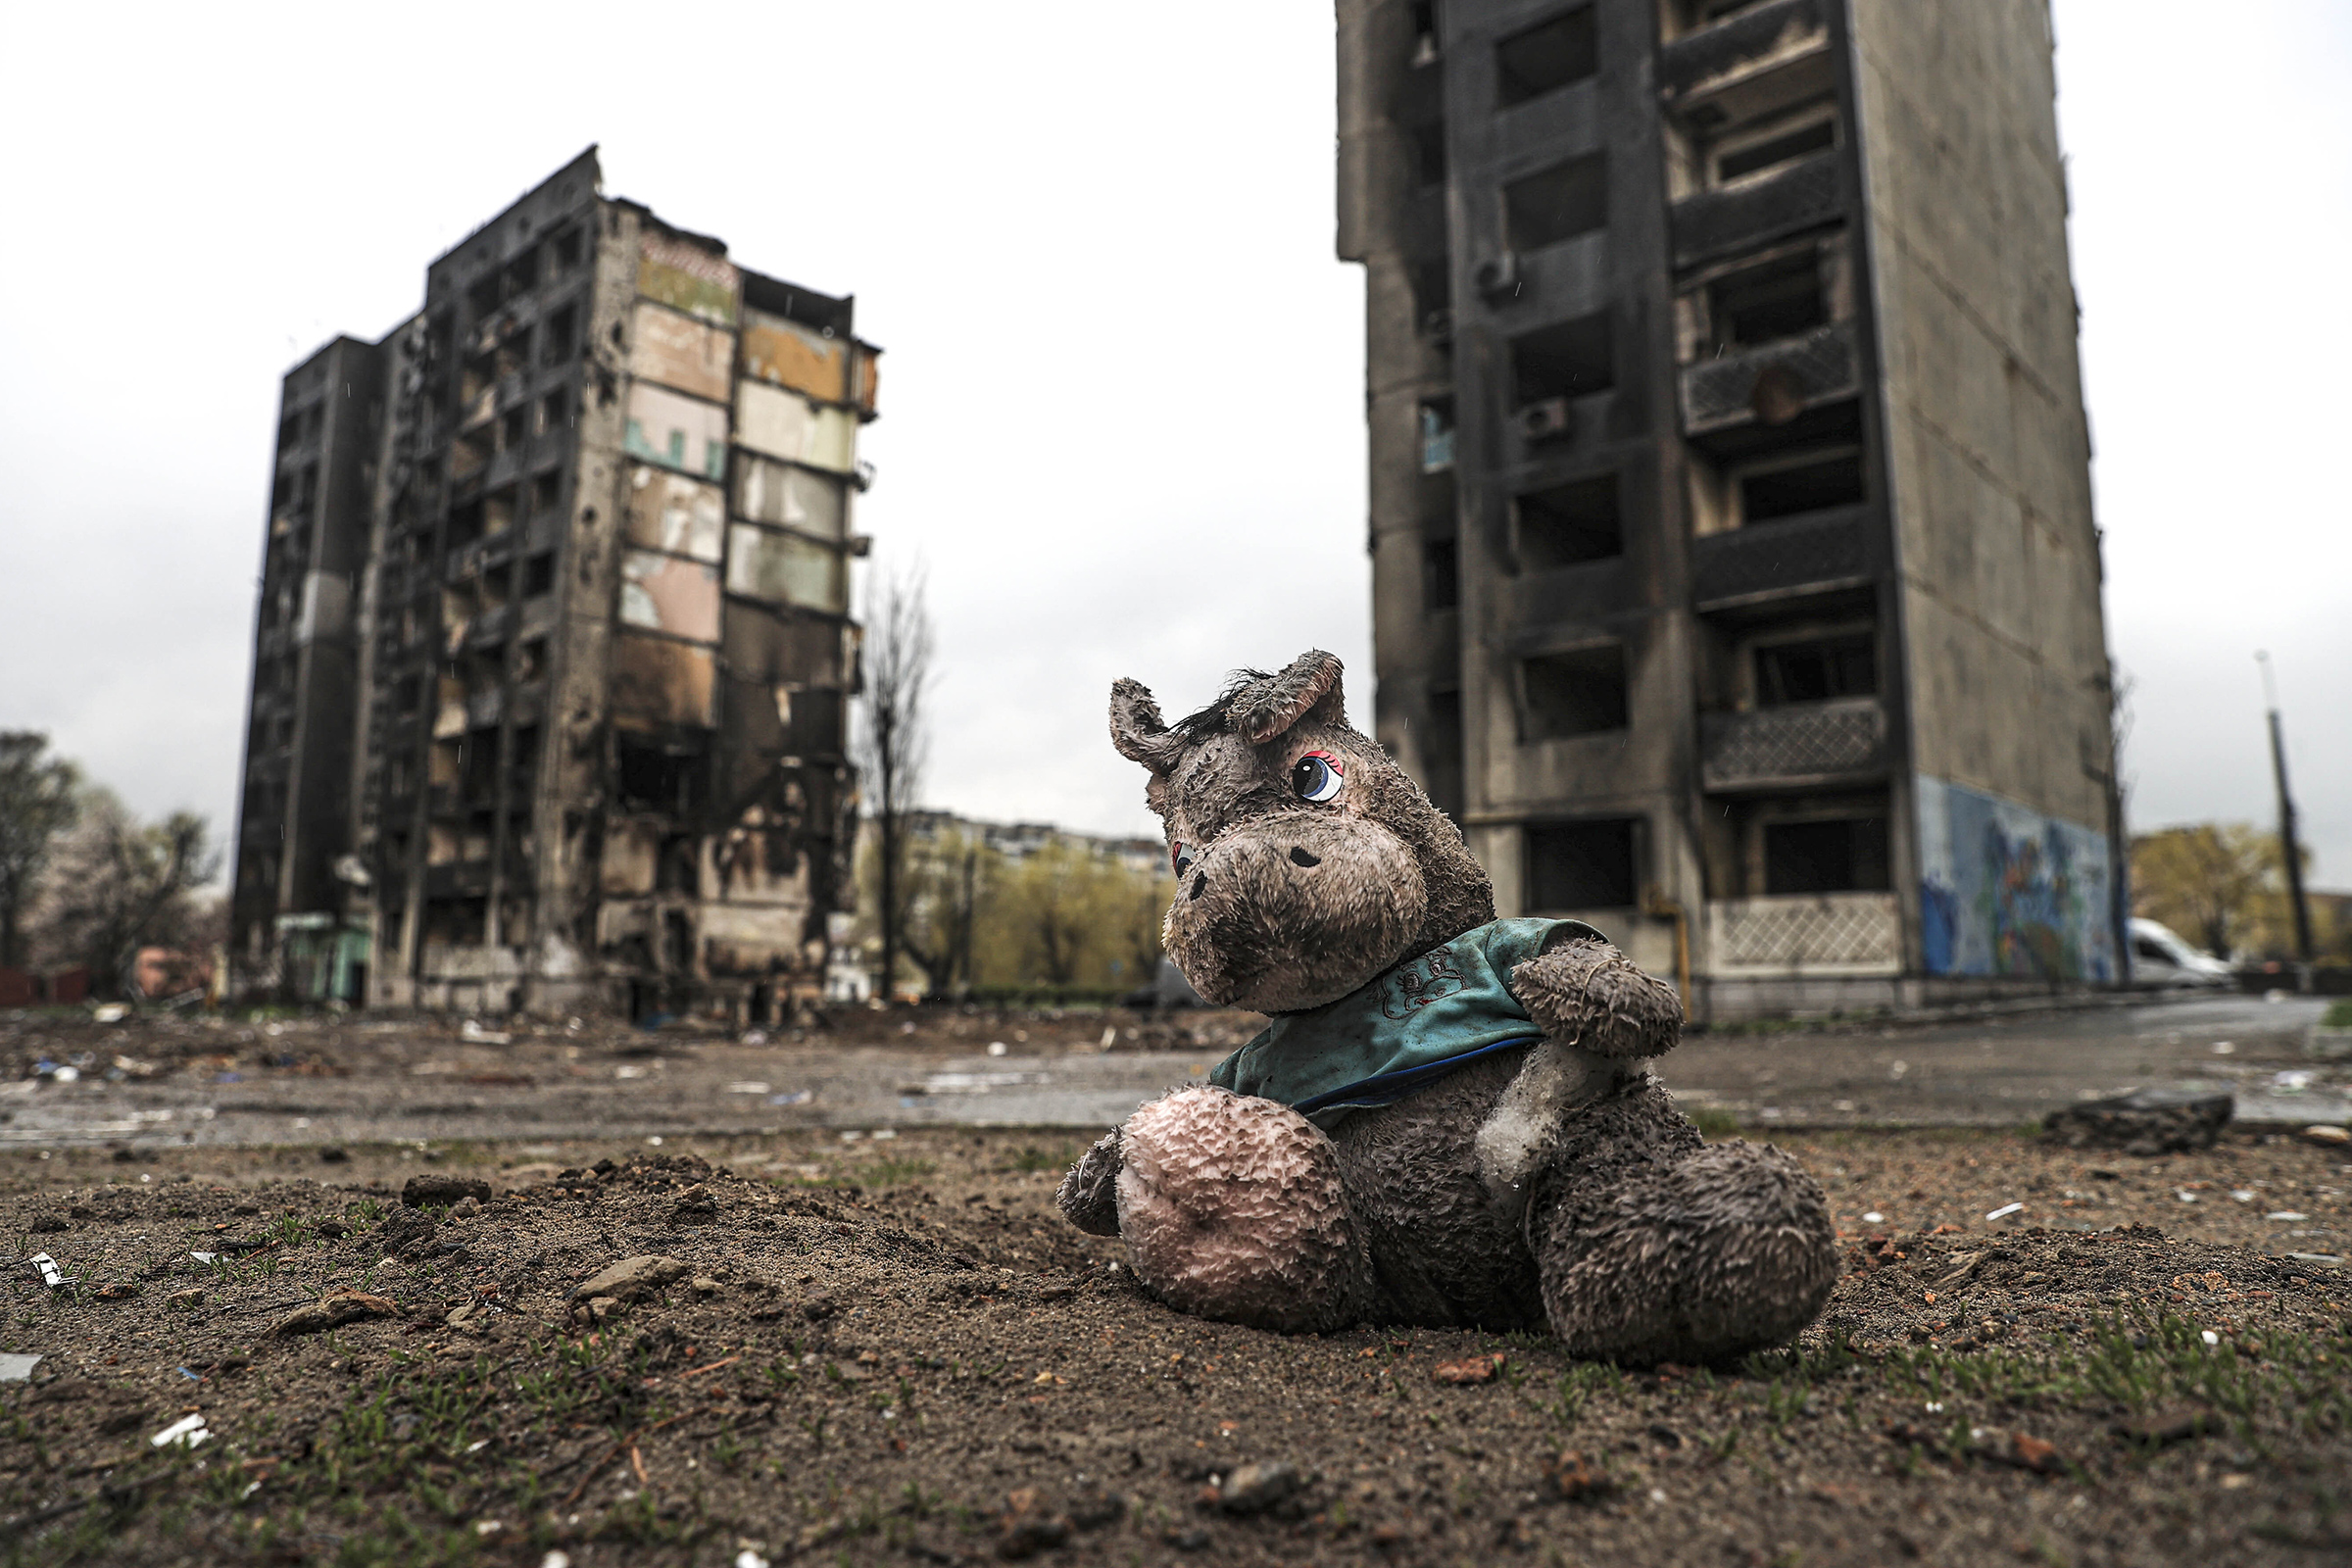 A muddy toy separated from a Ukrainian child is seen among the ruins of damaged buildings in Borodianka of Kyiv Oblast of Ukraine on April 22, 2022. (Metin Aktas—Anadolu Agency/Getty Images)